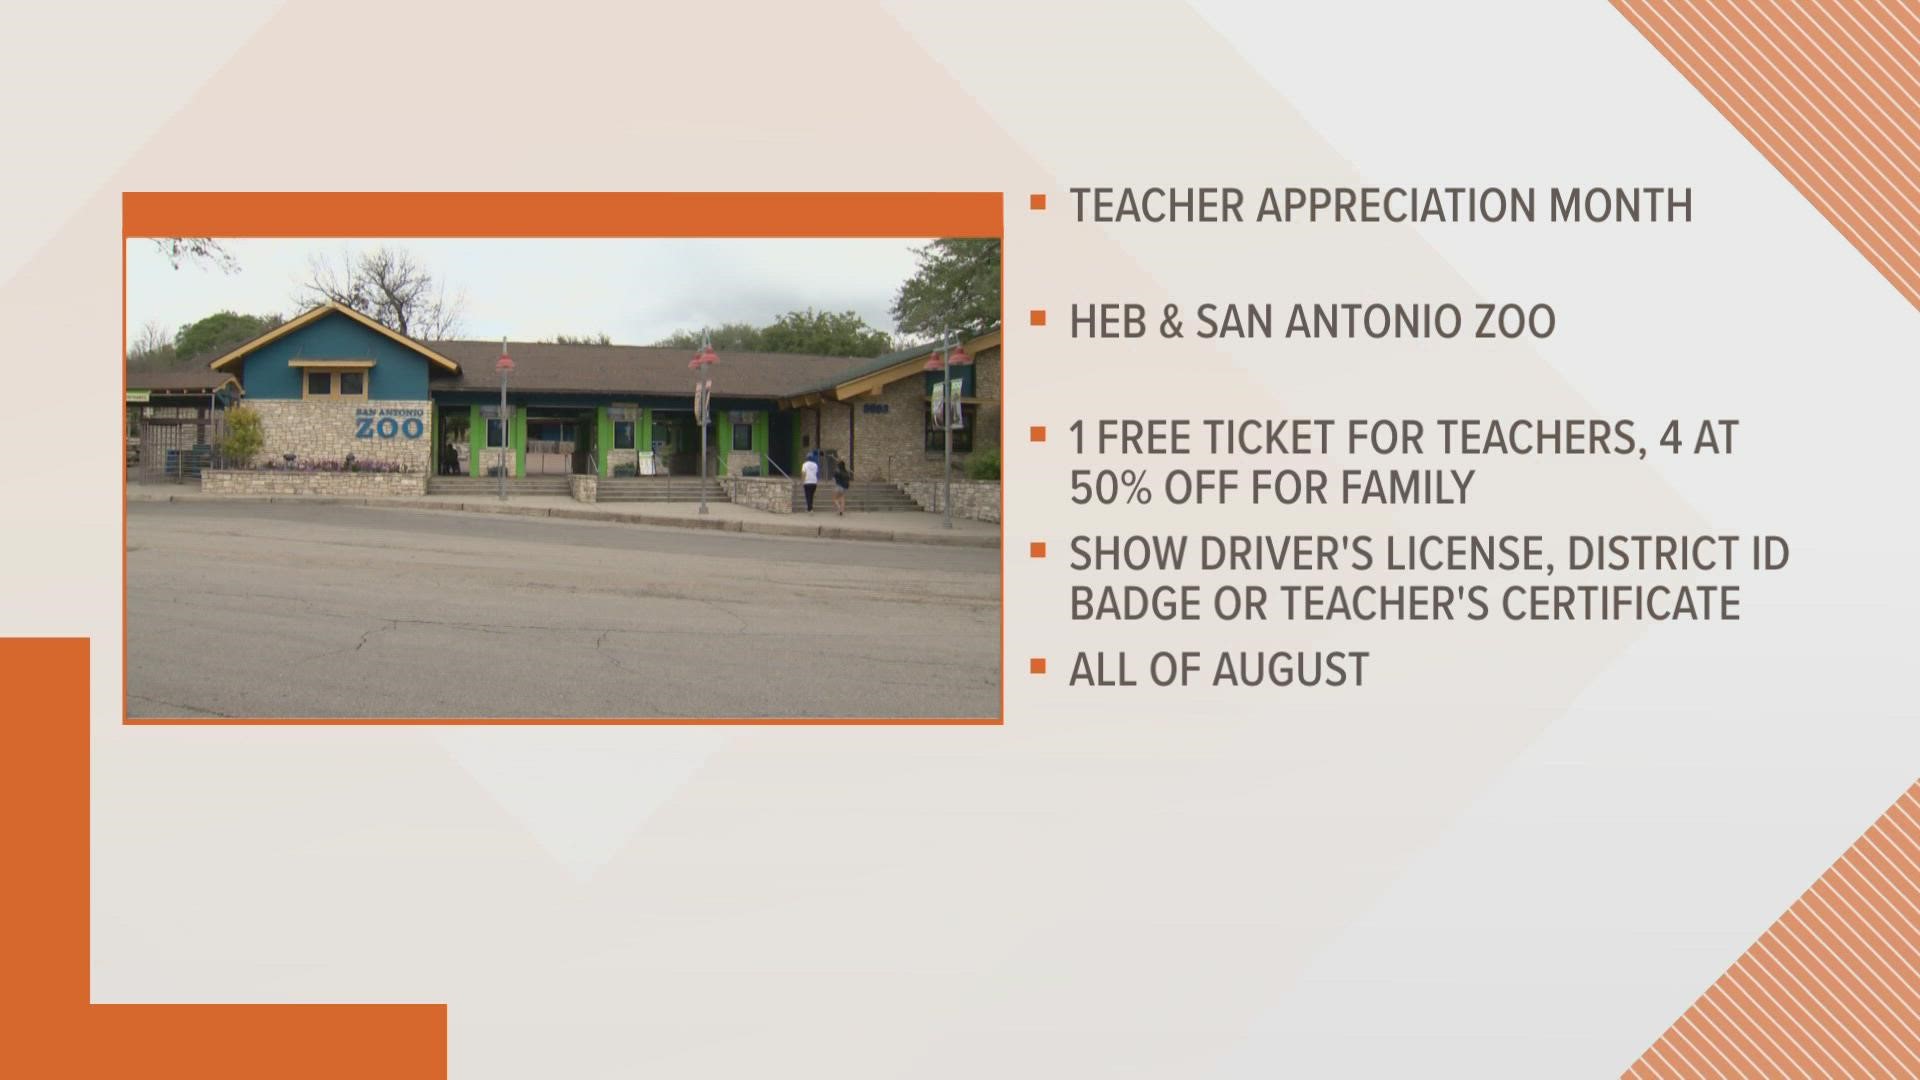 Teacher must be an active instructor at any school district in Texas, employed by an accredited K-12 public, private, or parochial institution in Texas.